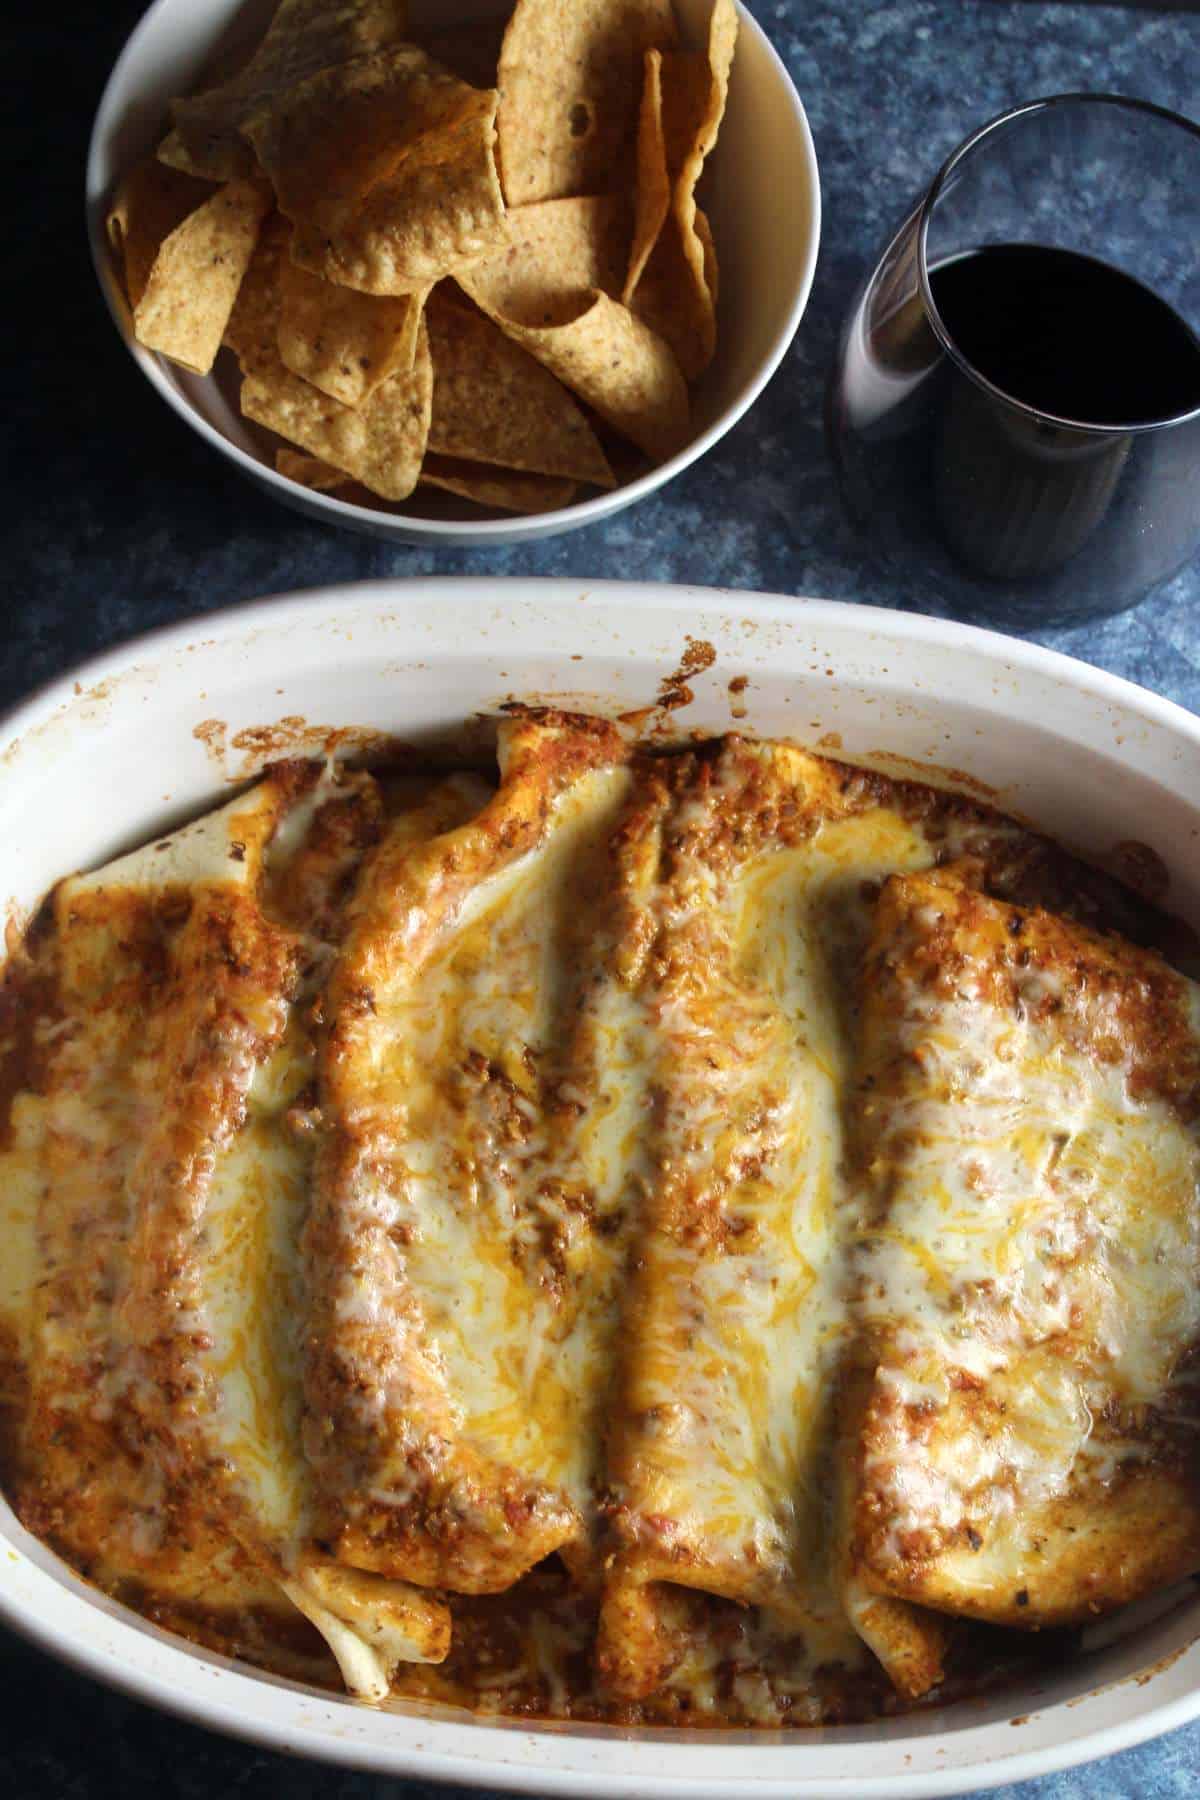 beef and black been enchiladas with melted cheese, in a white baking dish.